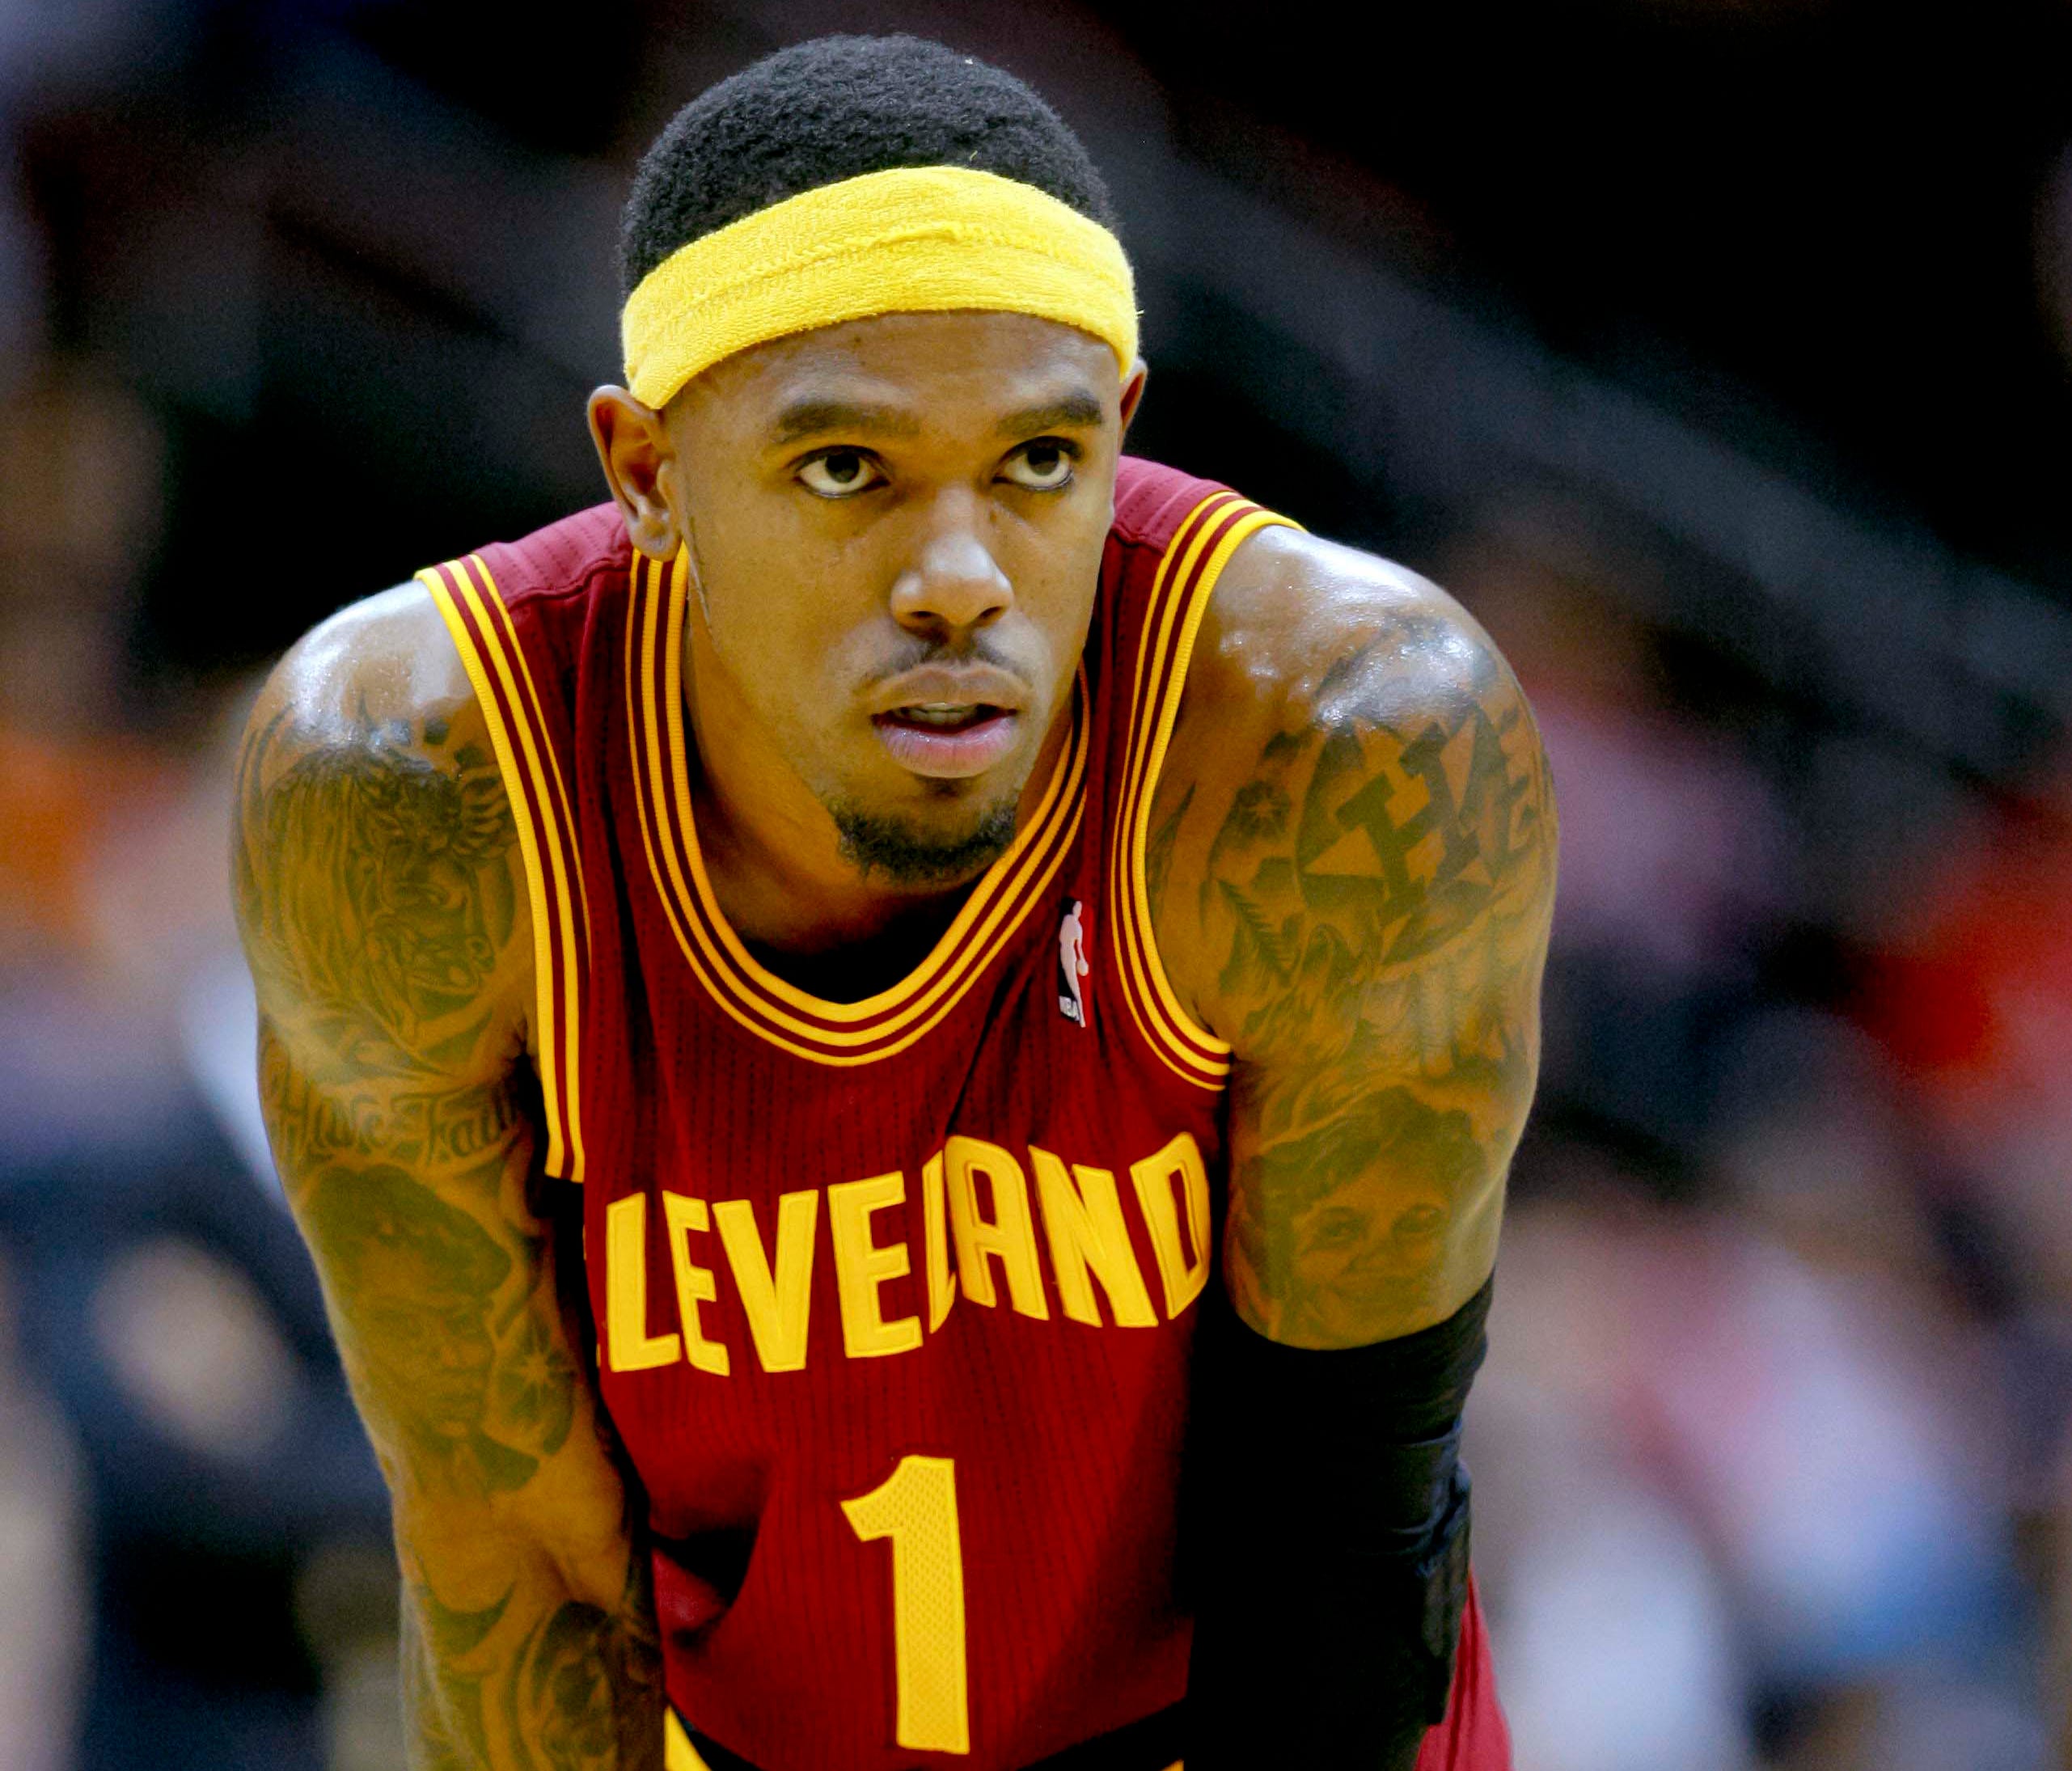 Former Cavaliers guard Daniel Gibson says writing music helped him deal with depression.